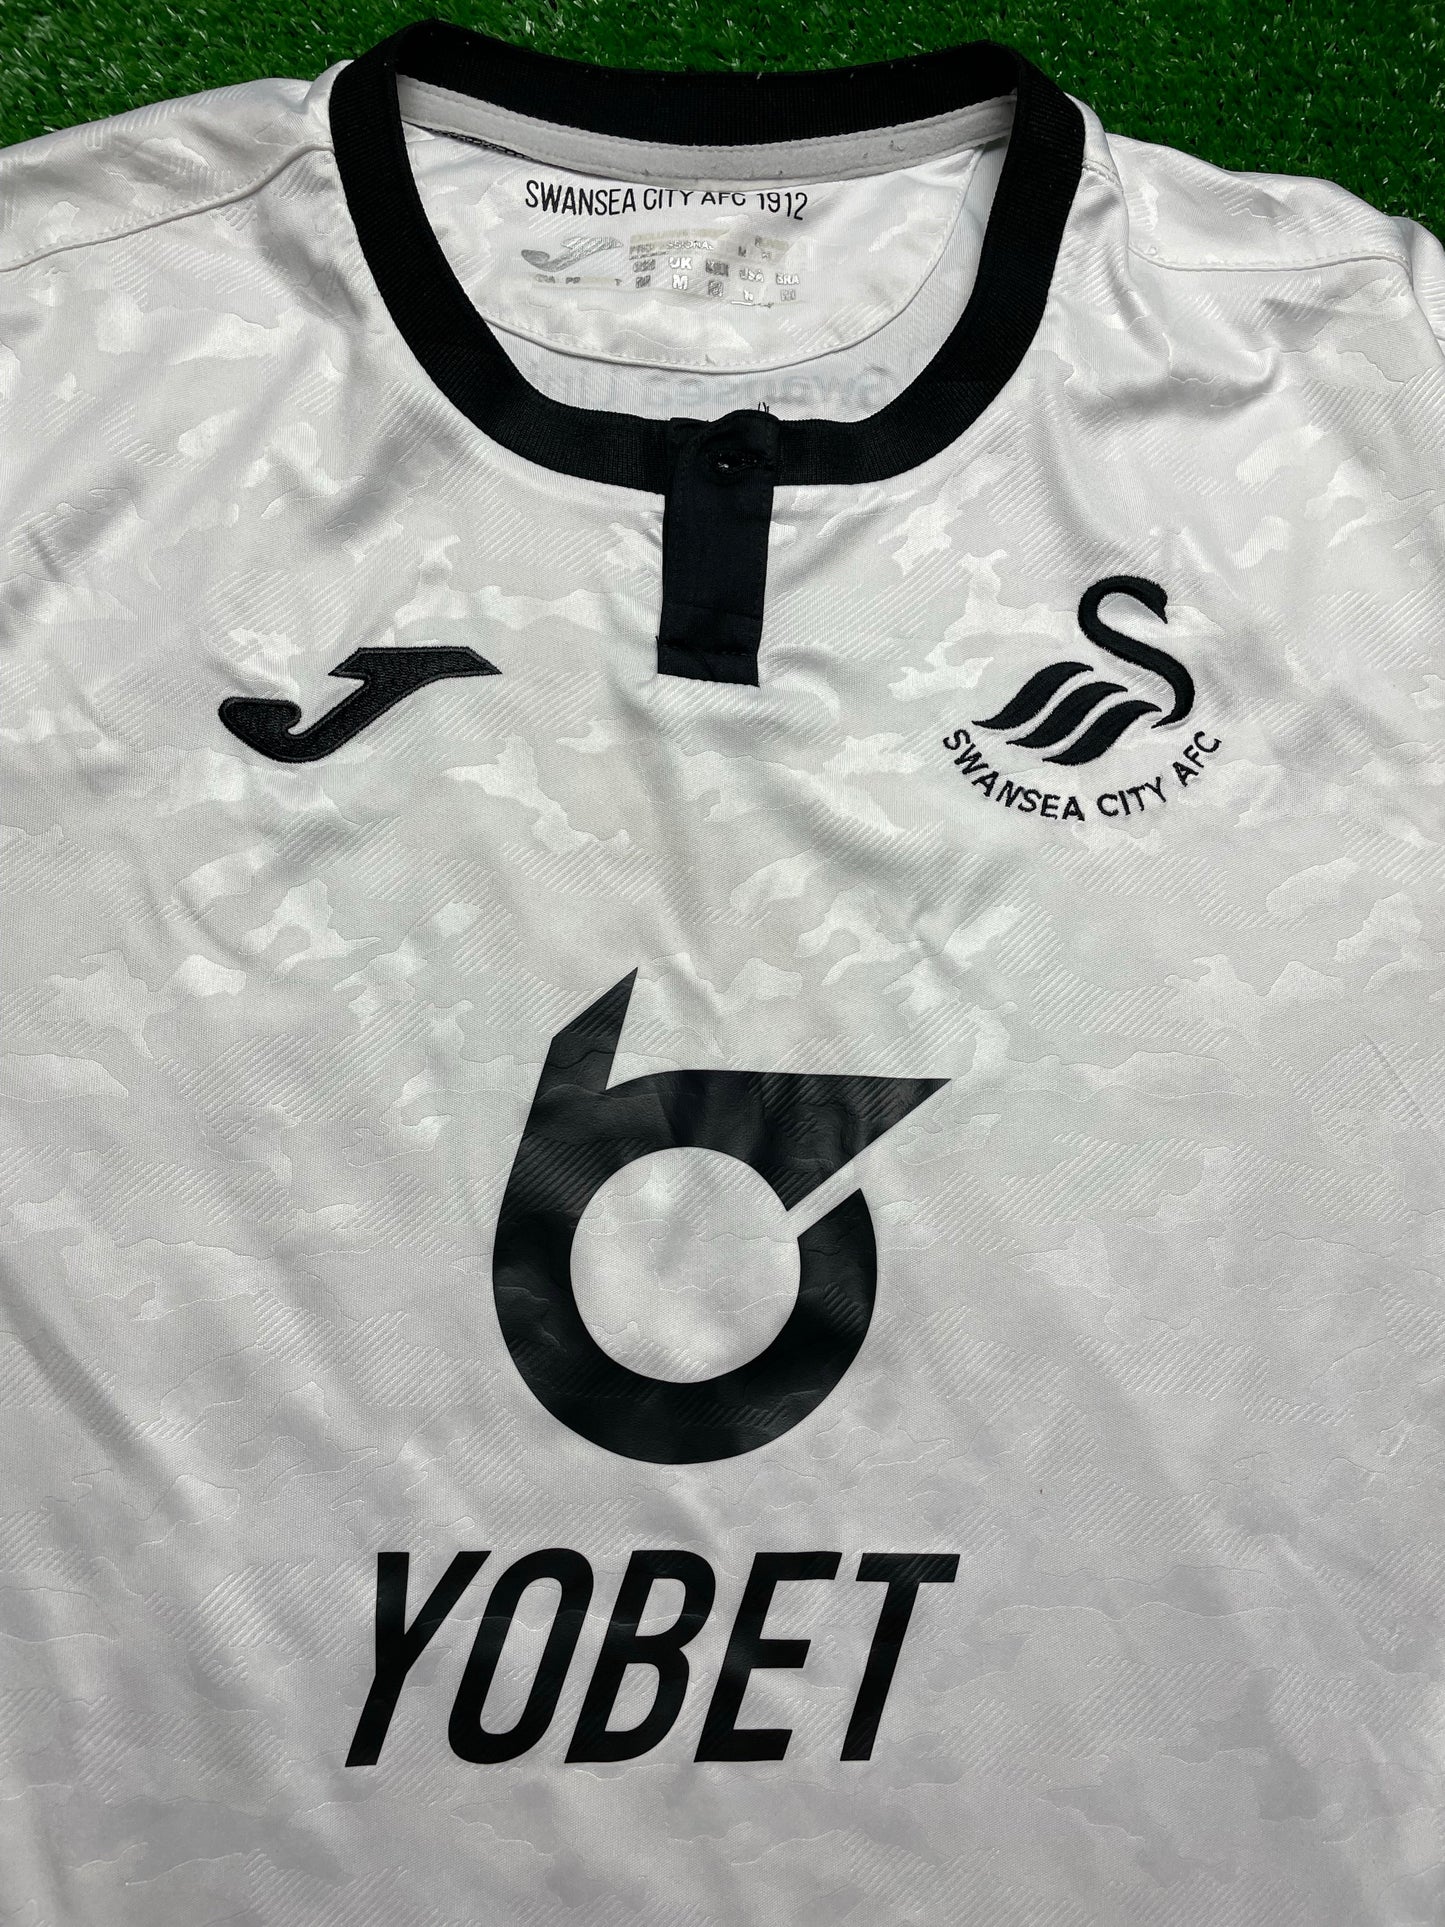 Swansea City 2019/20 Home Shirt (Very Good) - Size L